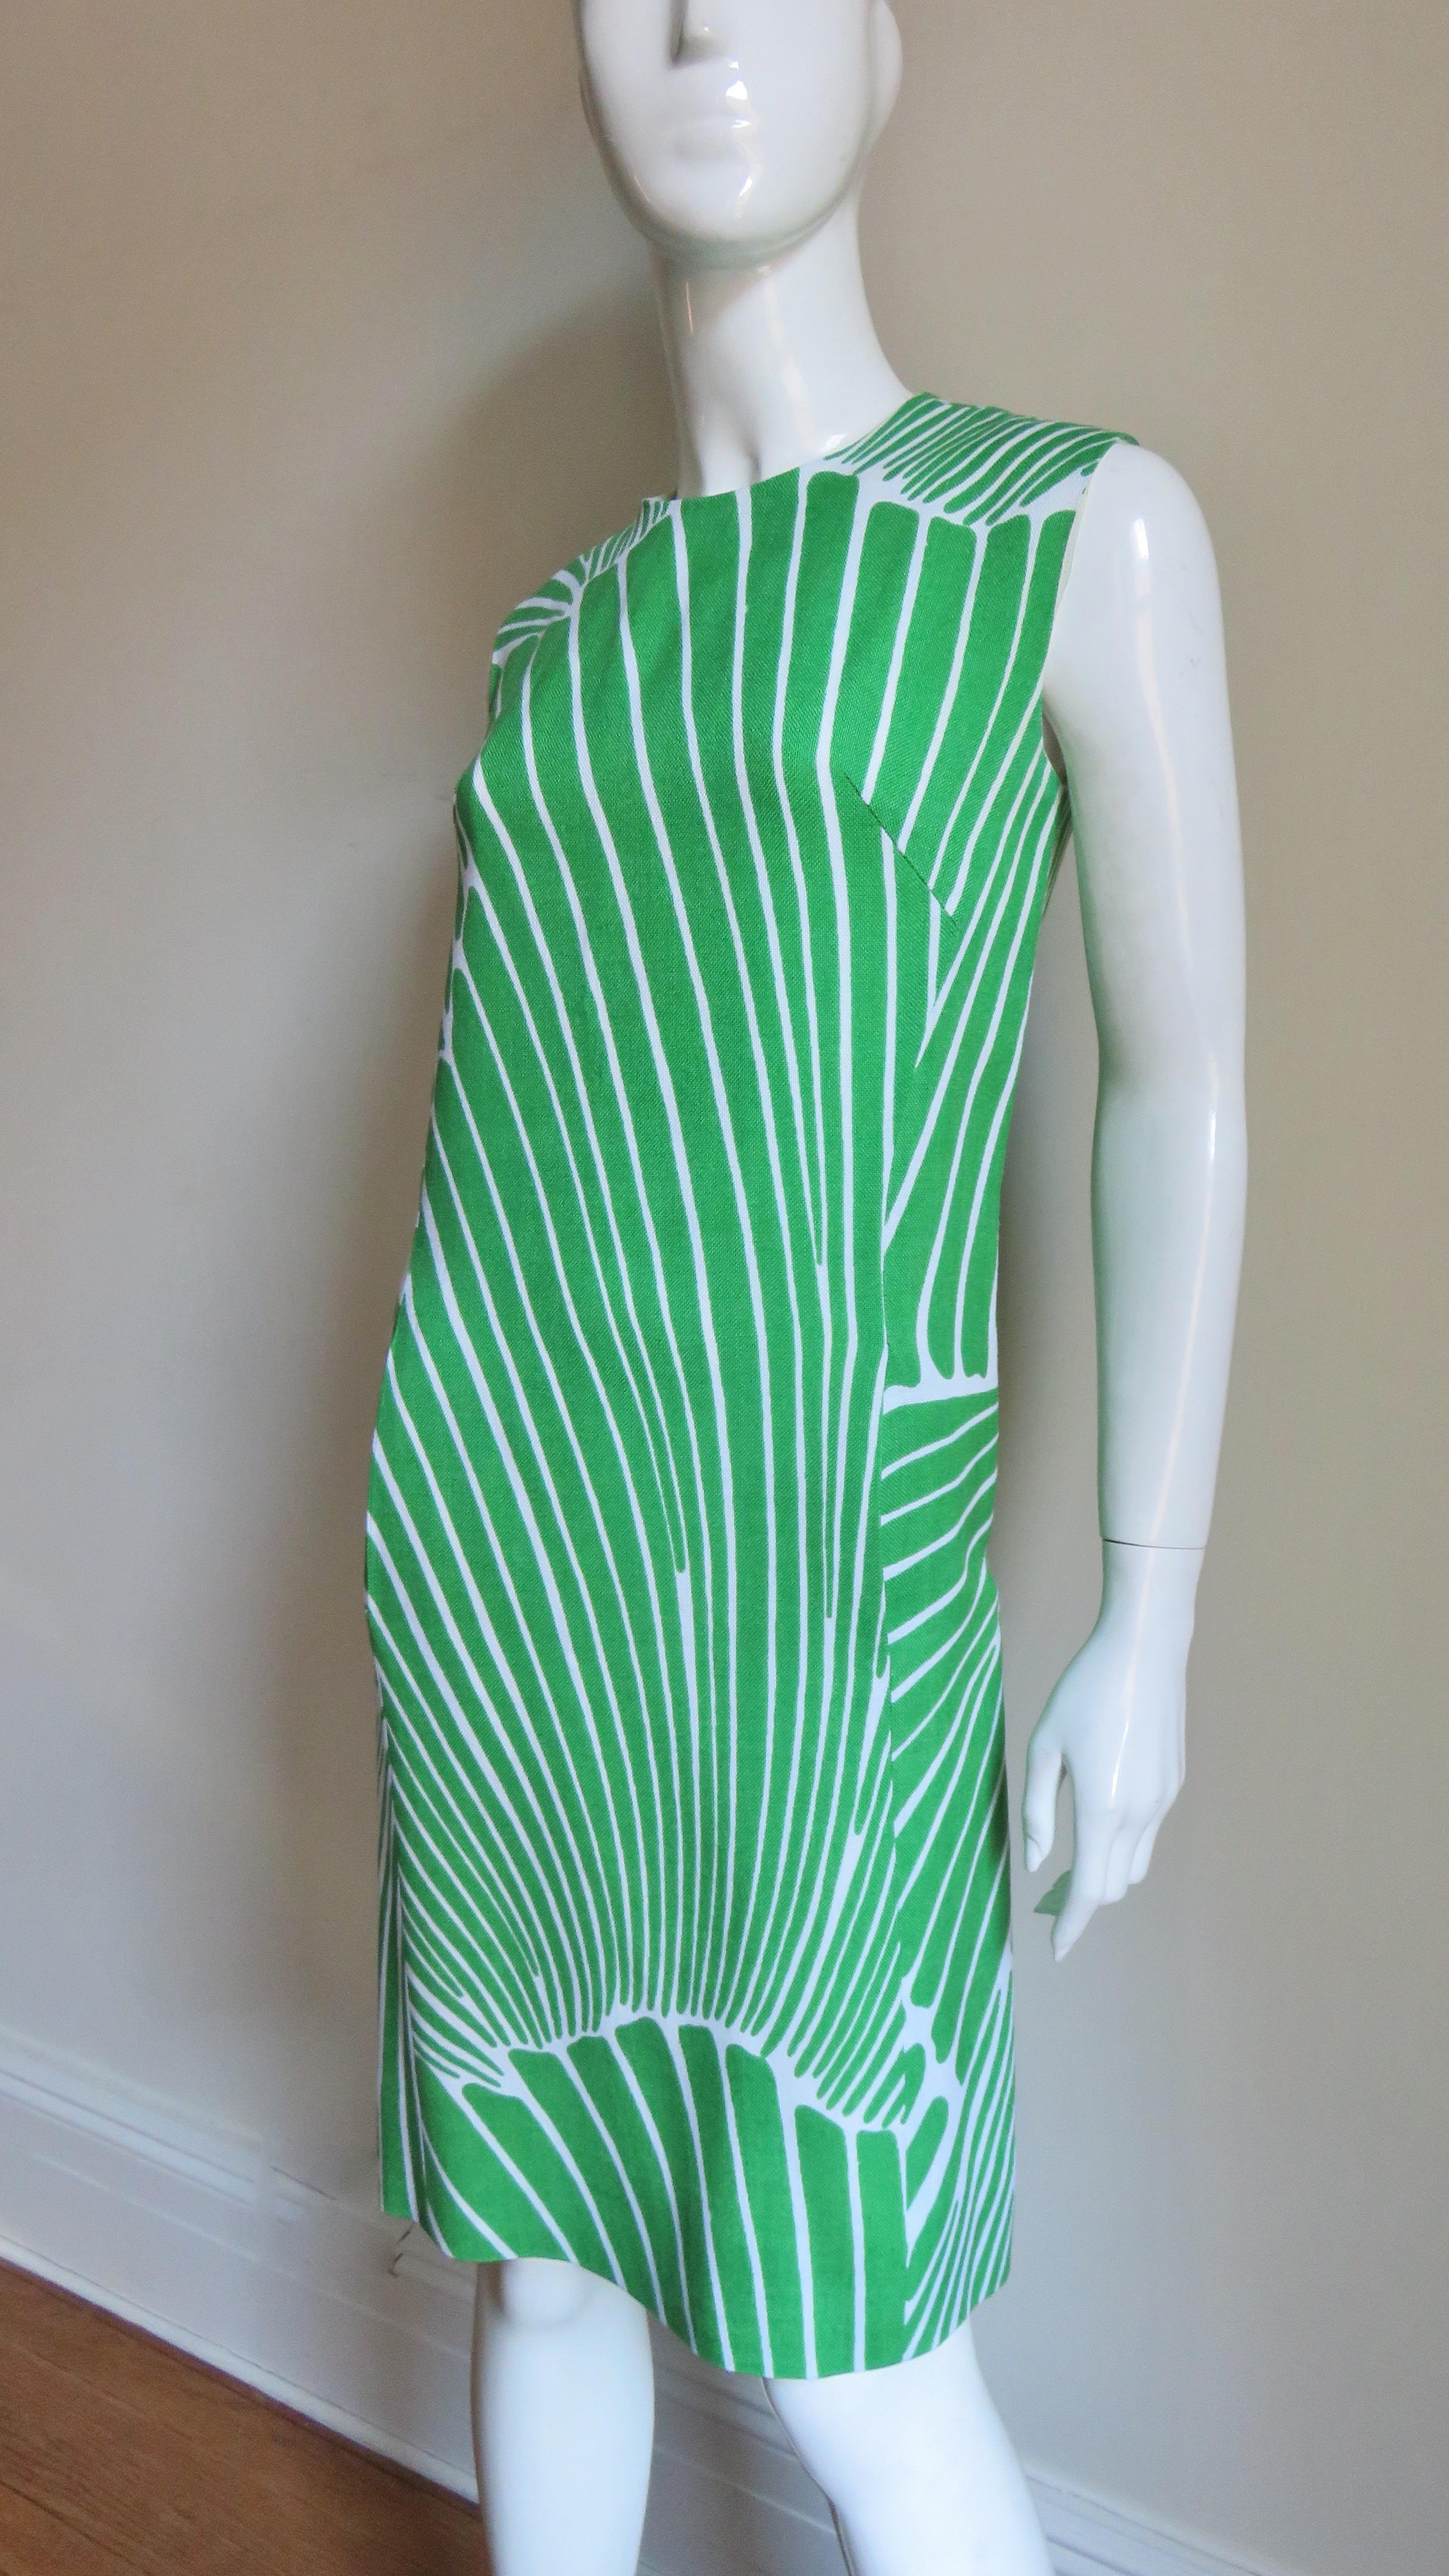 A fabulous geometric pattern linen dress and coat set in green and white by Gilbert Couture sold from Woldenberg's high end fashion shop of the time. The sleeveless shift dress has a crew neck and hip seam pockets.  The coat has a small lapel